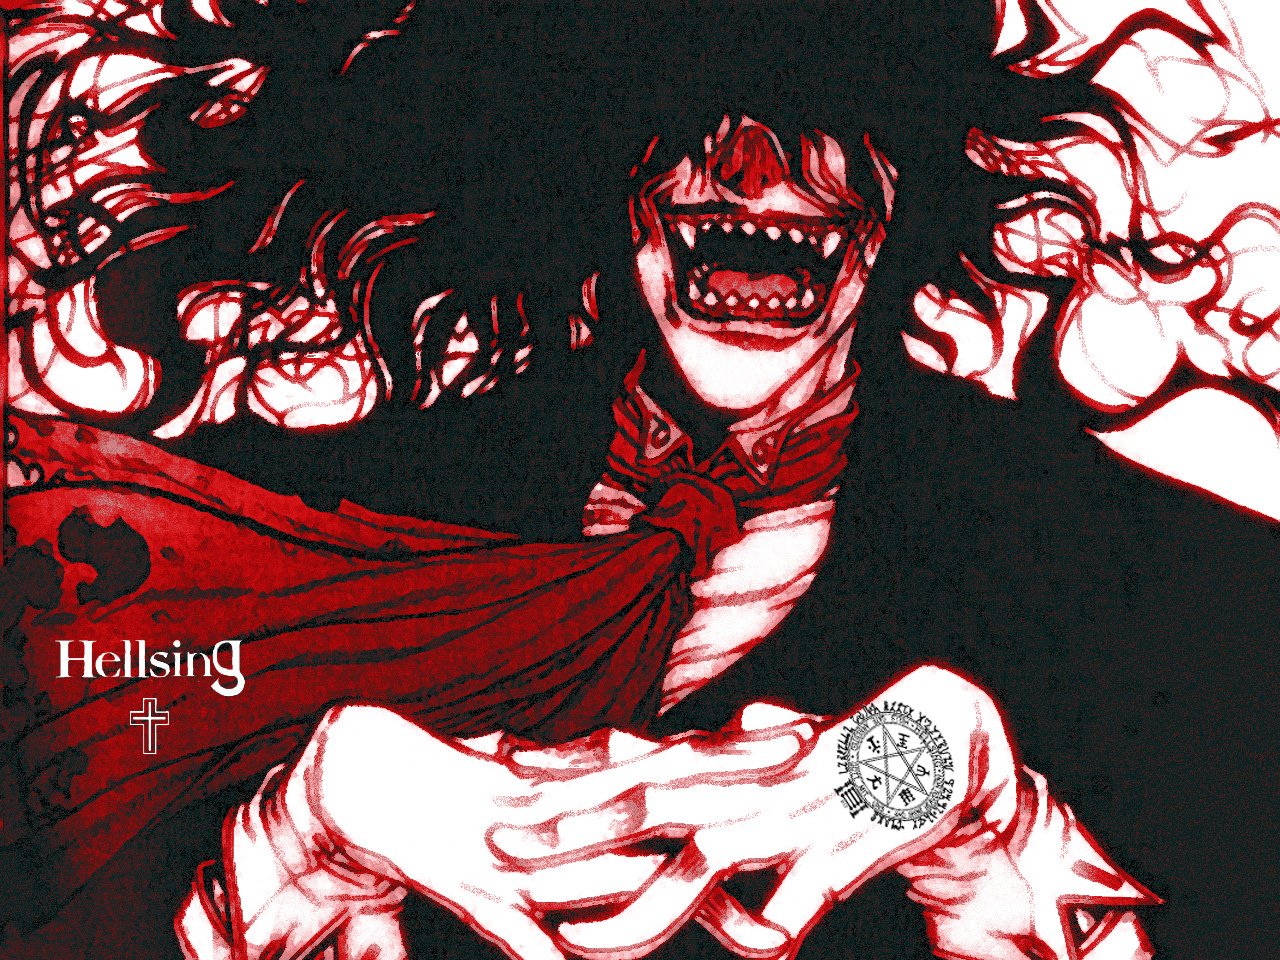 Hellsing Image - ID: 393387 - Image Abyss